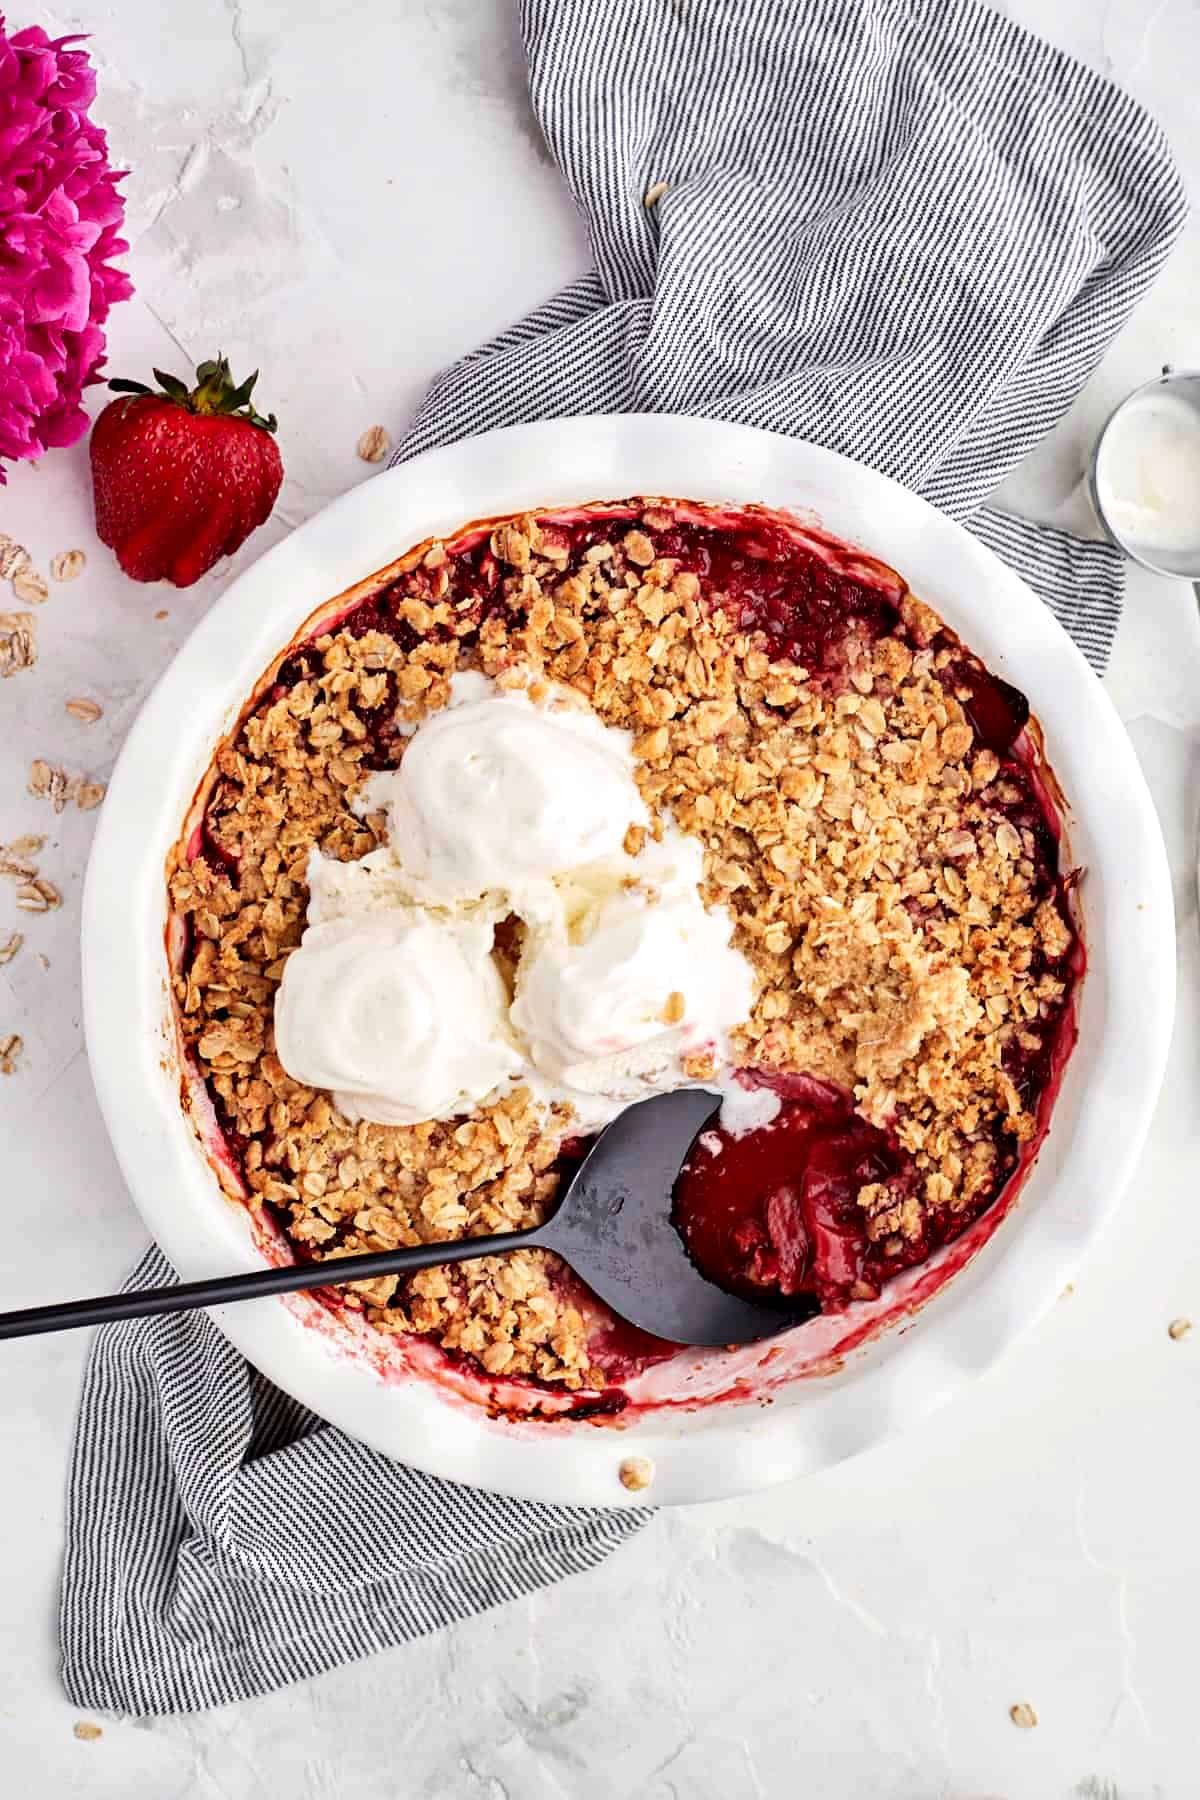 Strawberry Crisp with Oat Crumble